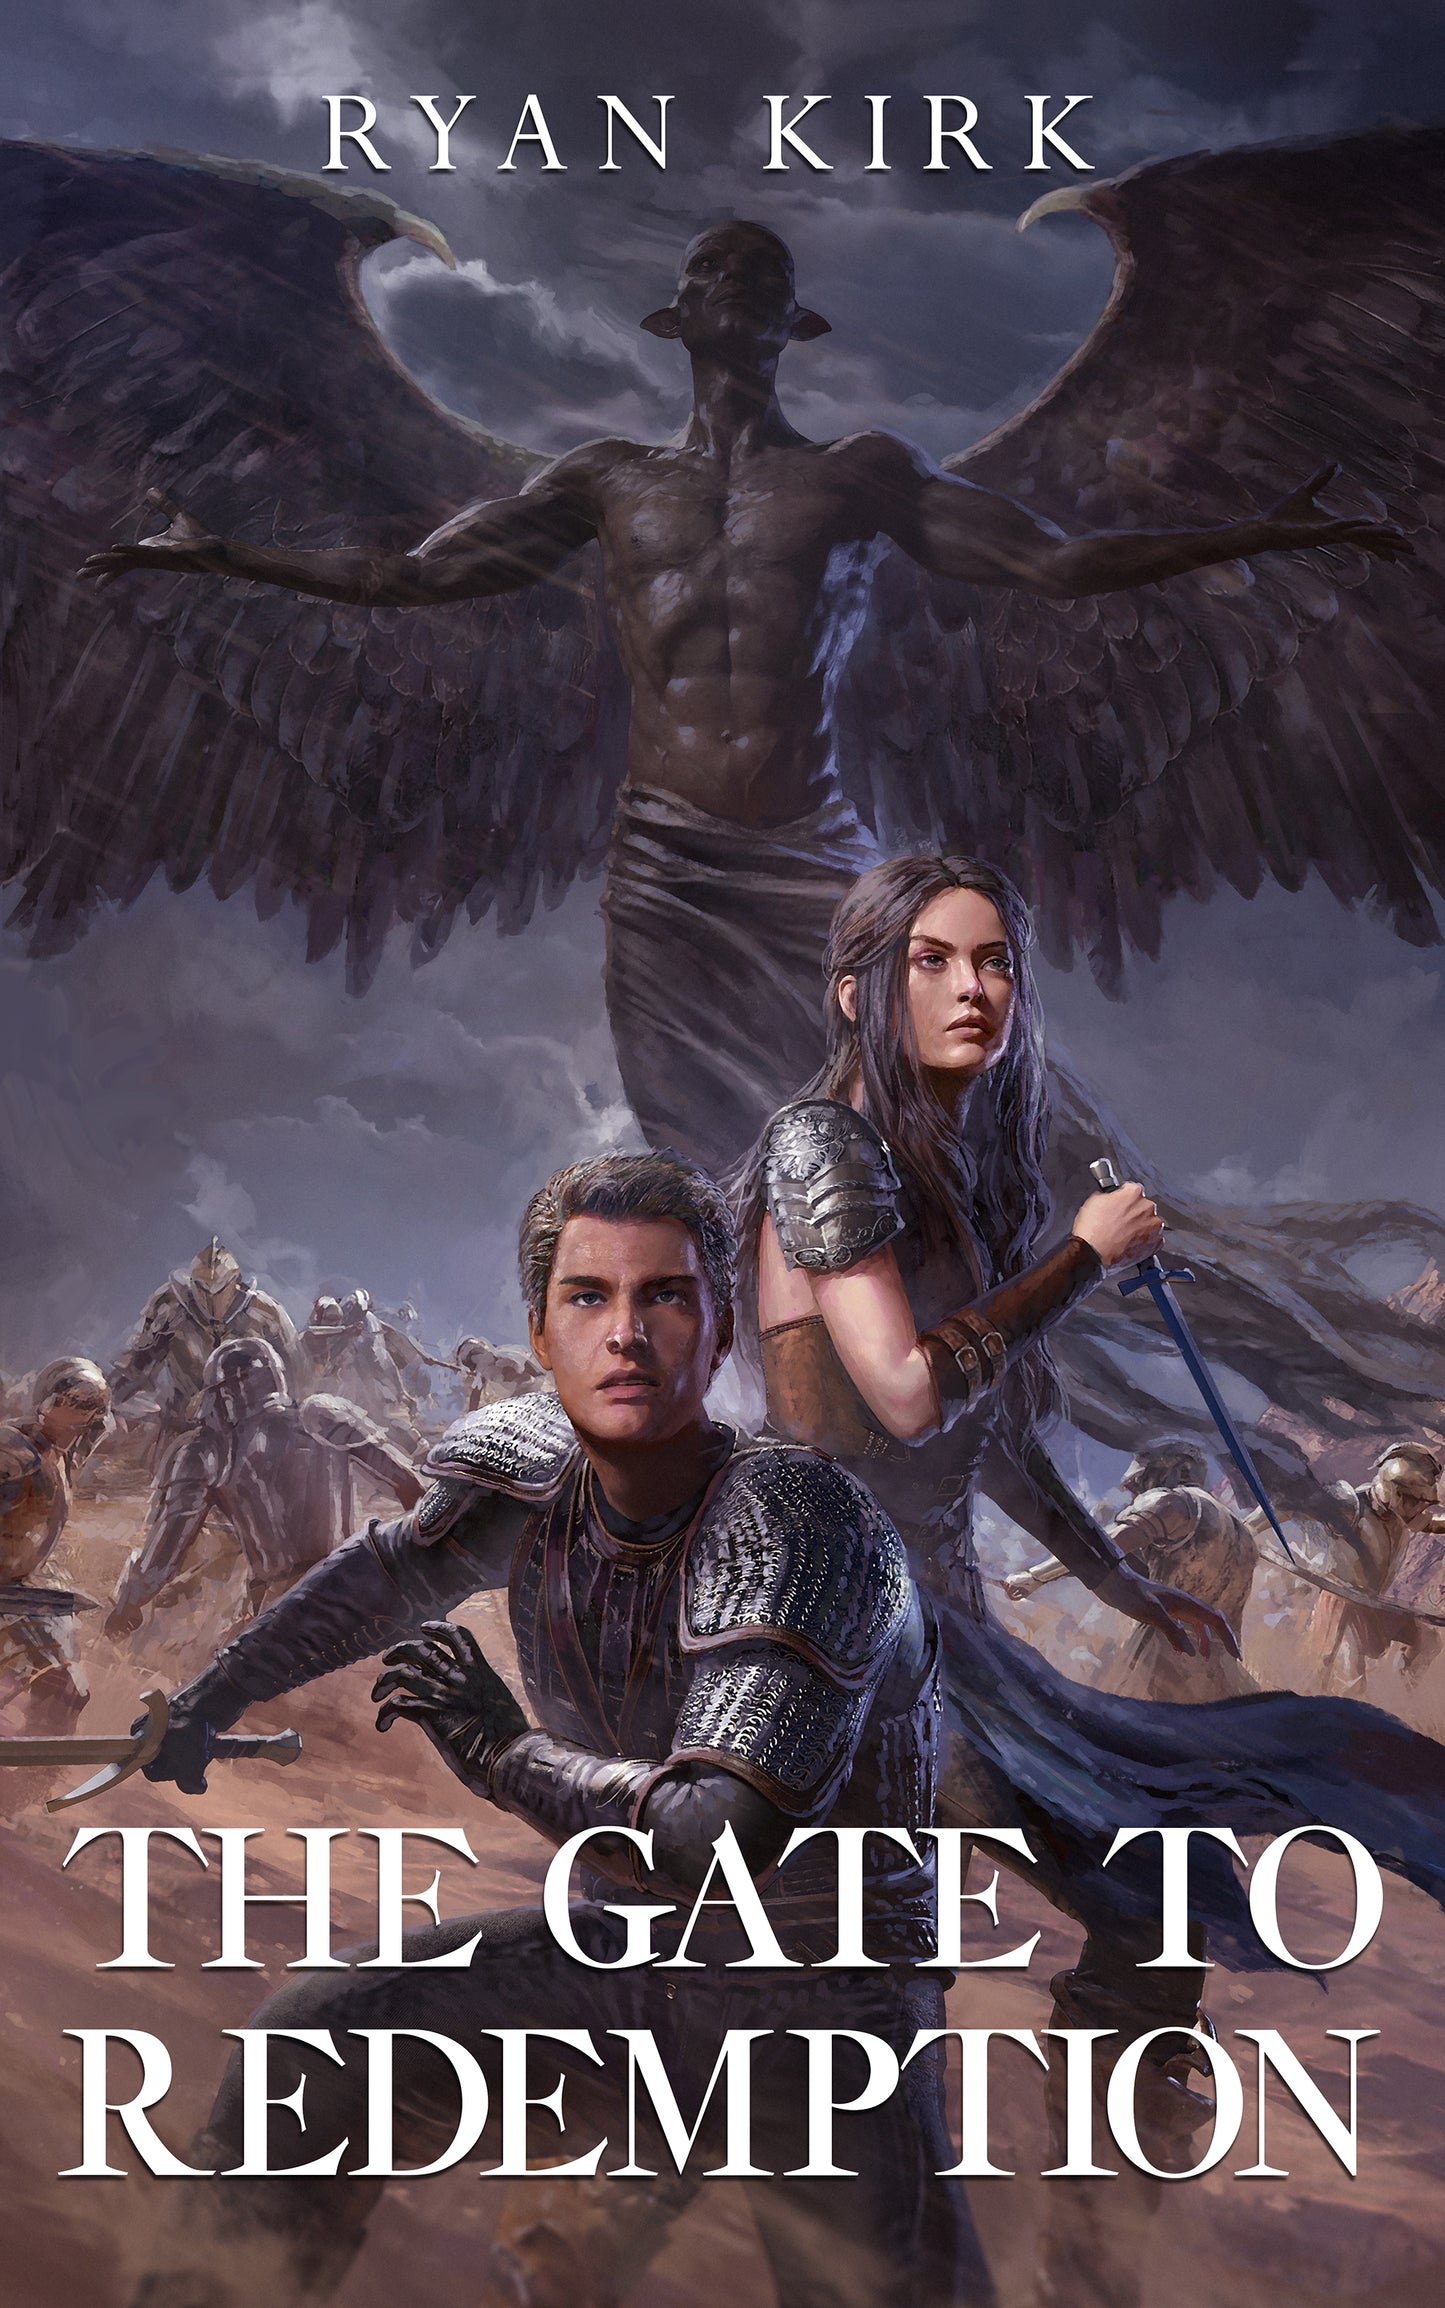 The Gate to Redemption E-book